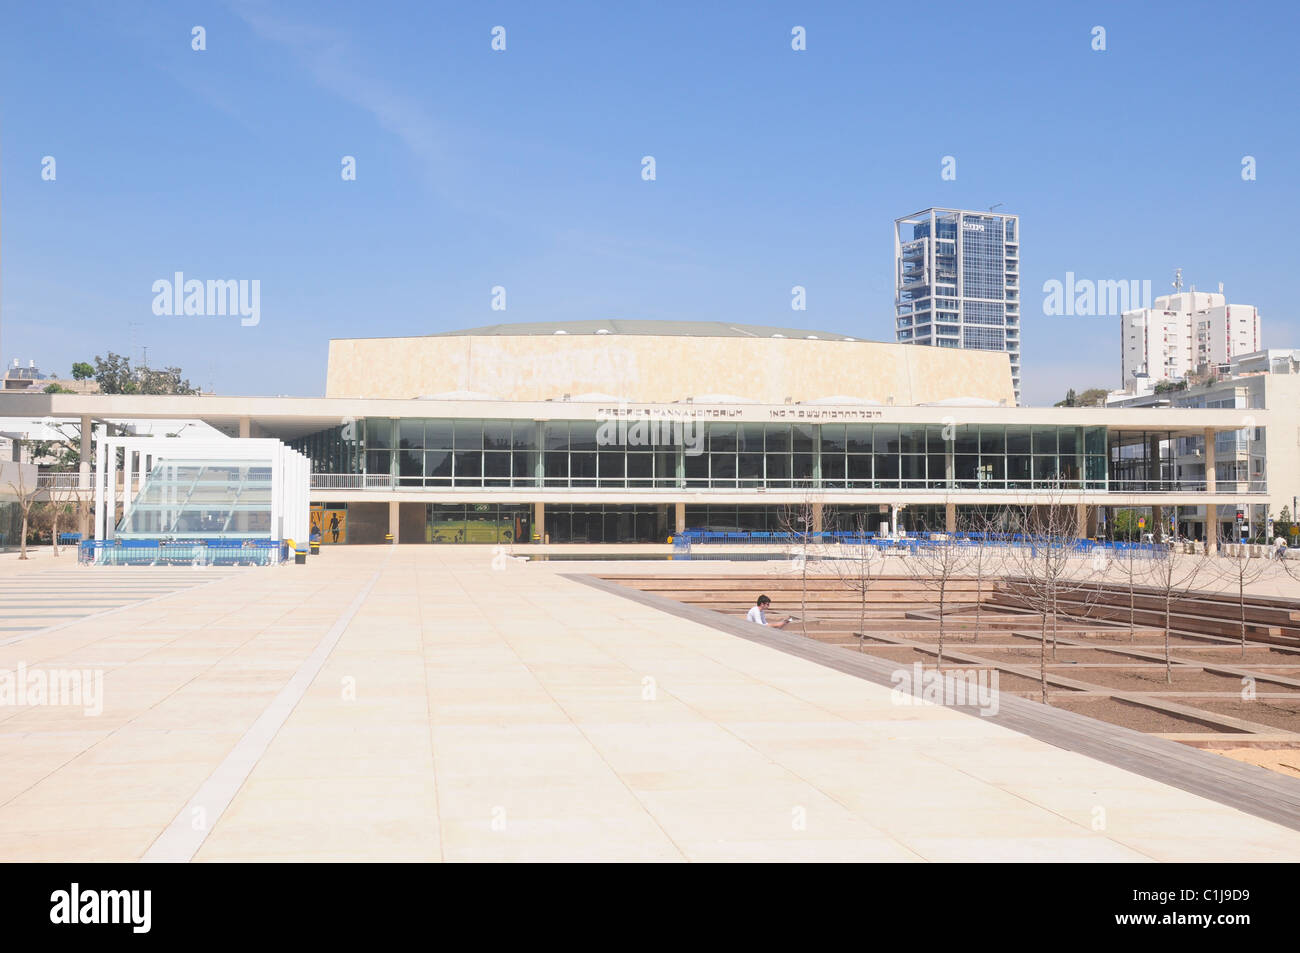 Fredric R Mann Auditorium, home of the Israel symphony orchestra. Stock Photo